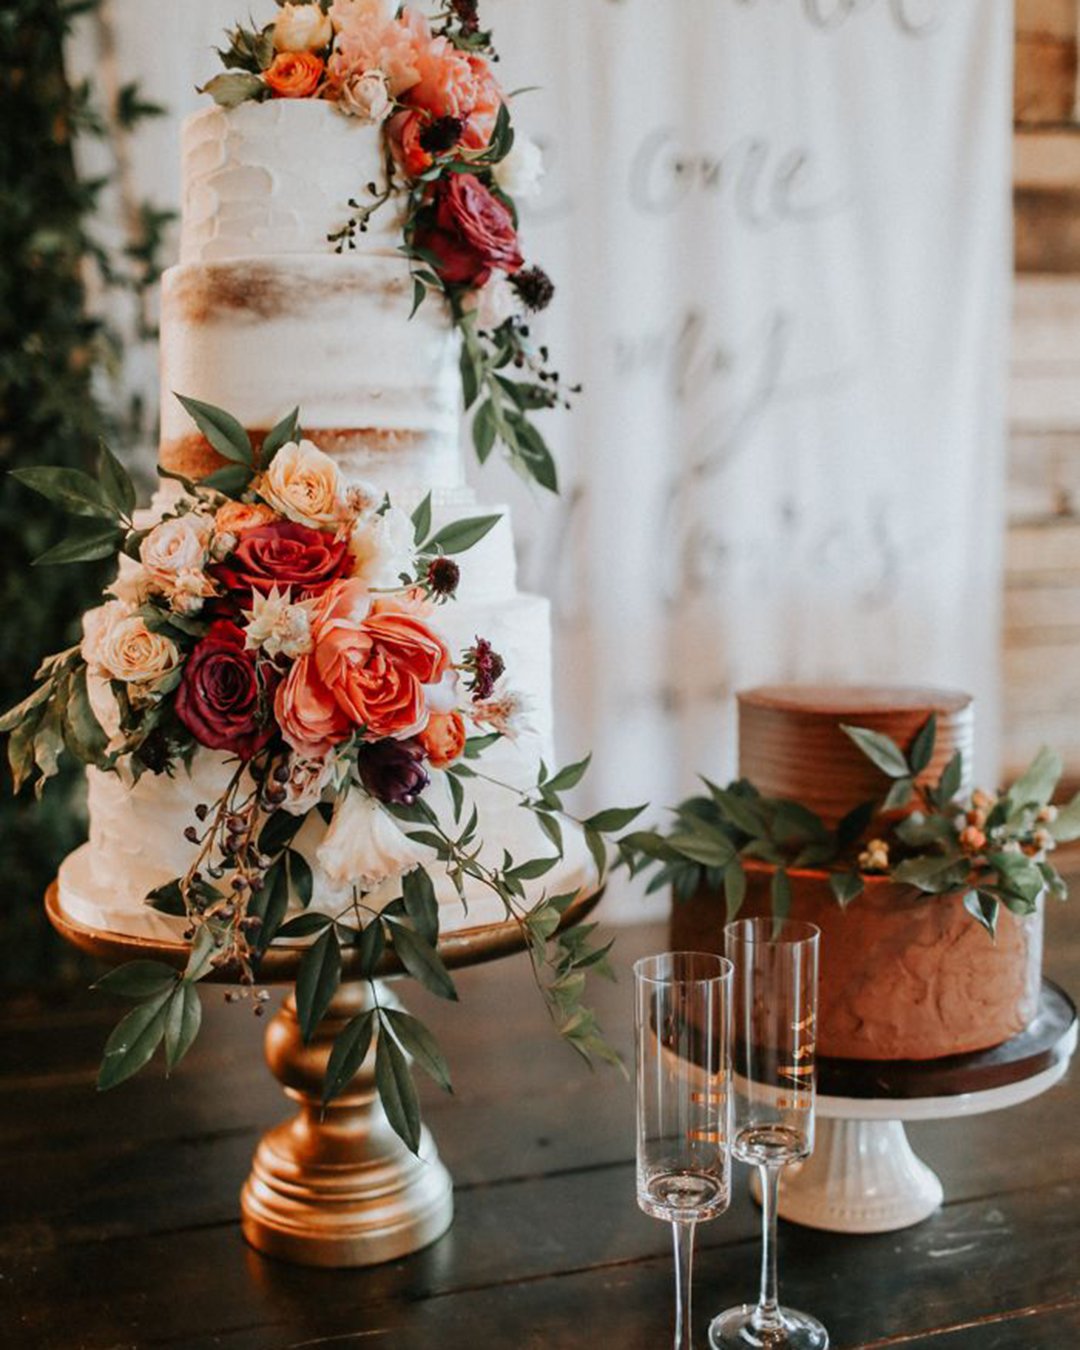 beautiful wedding cakes tall white cake with fresh roses chocolate cake with greens nearby melissa marshal